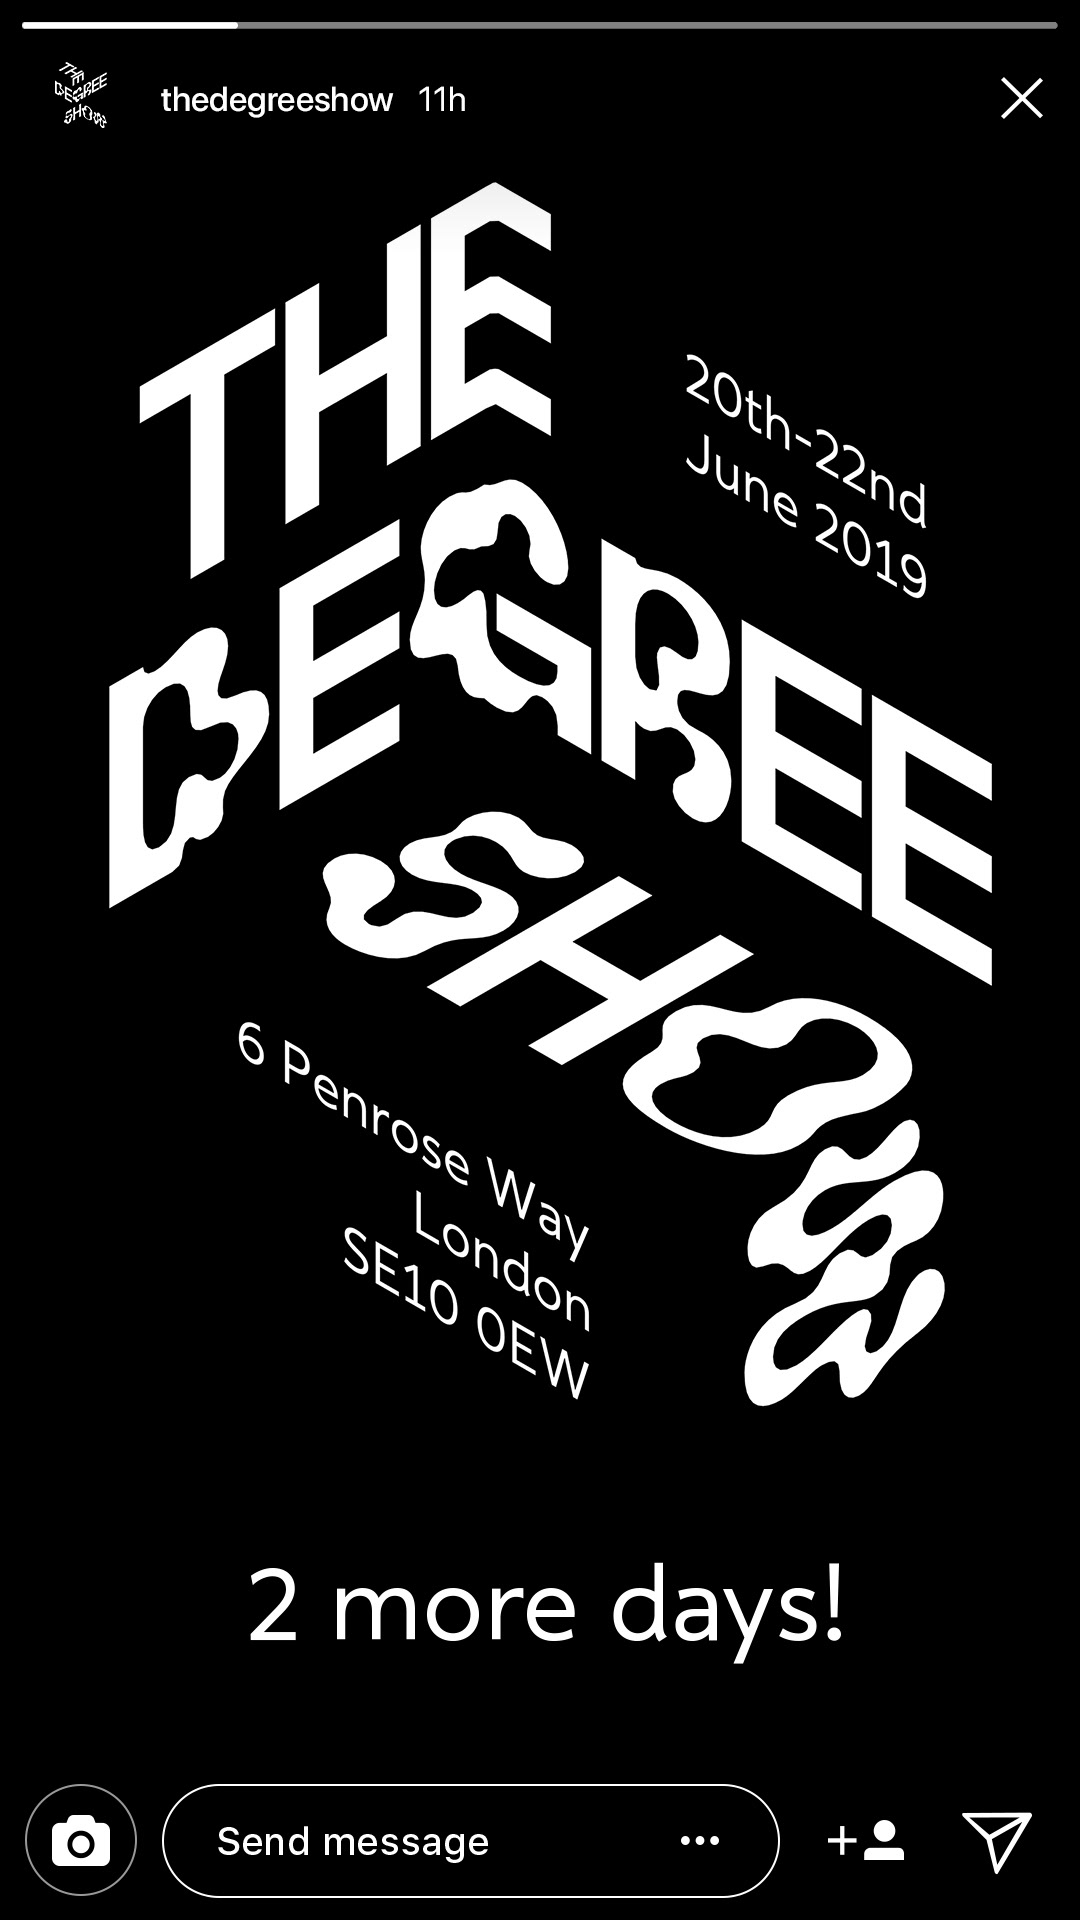 The Degree Show on Behancedc961978804199.5caf5a1183192.jpg